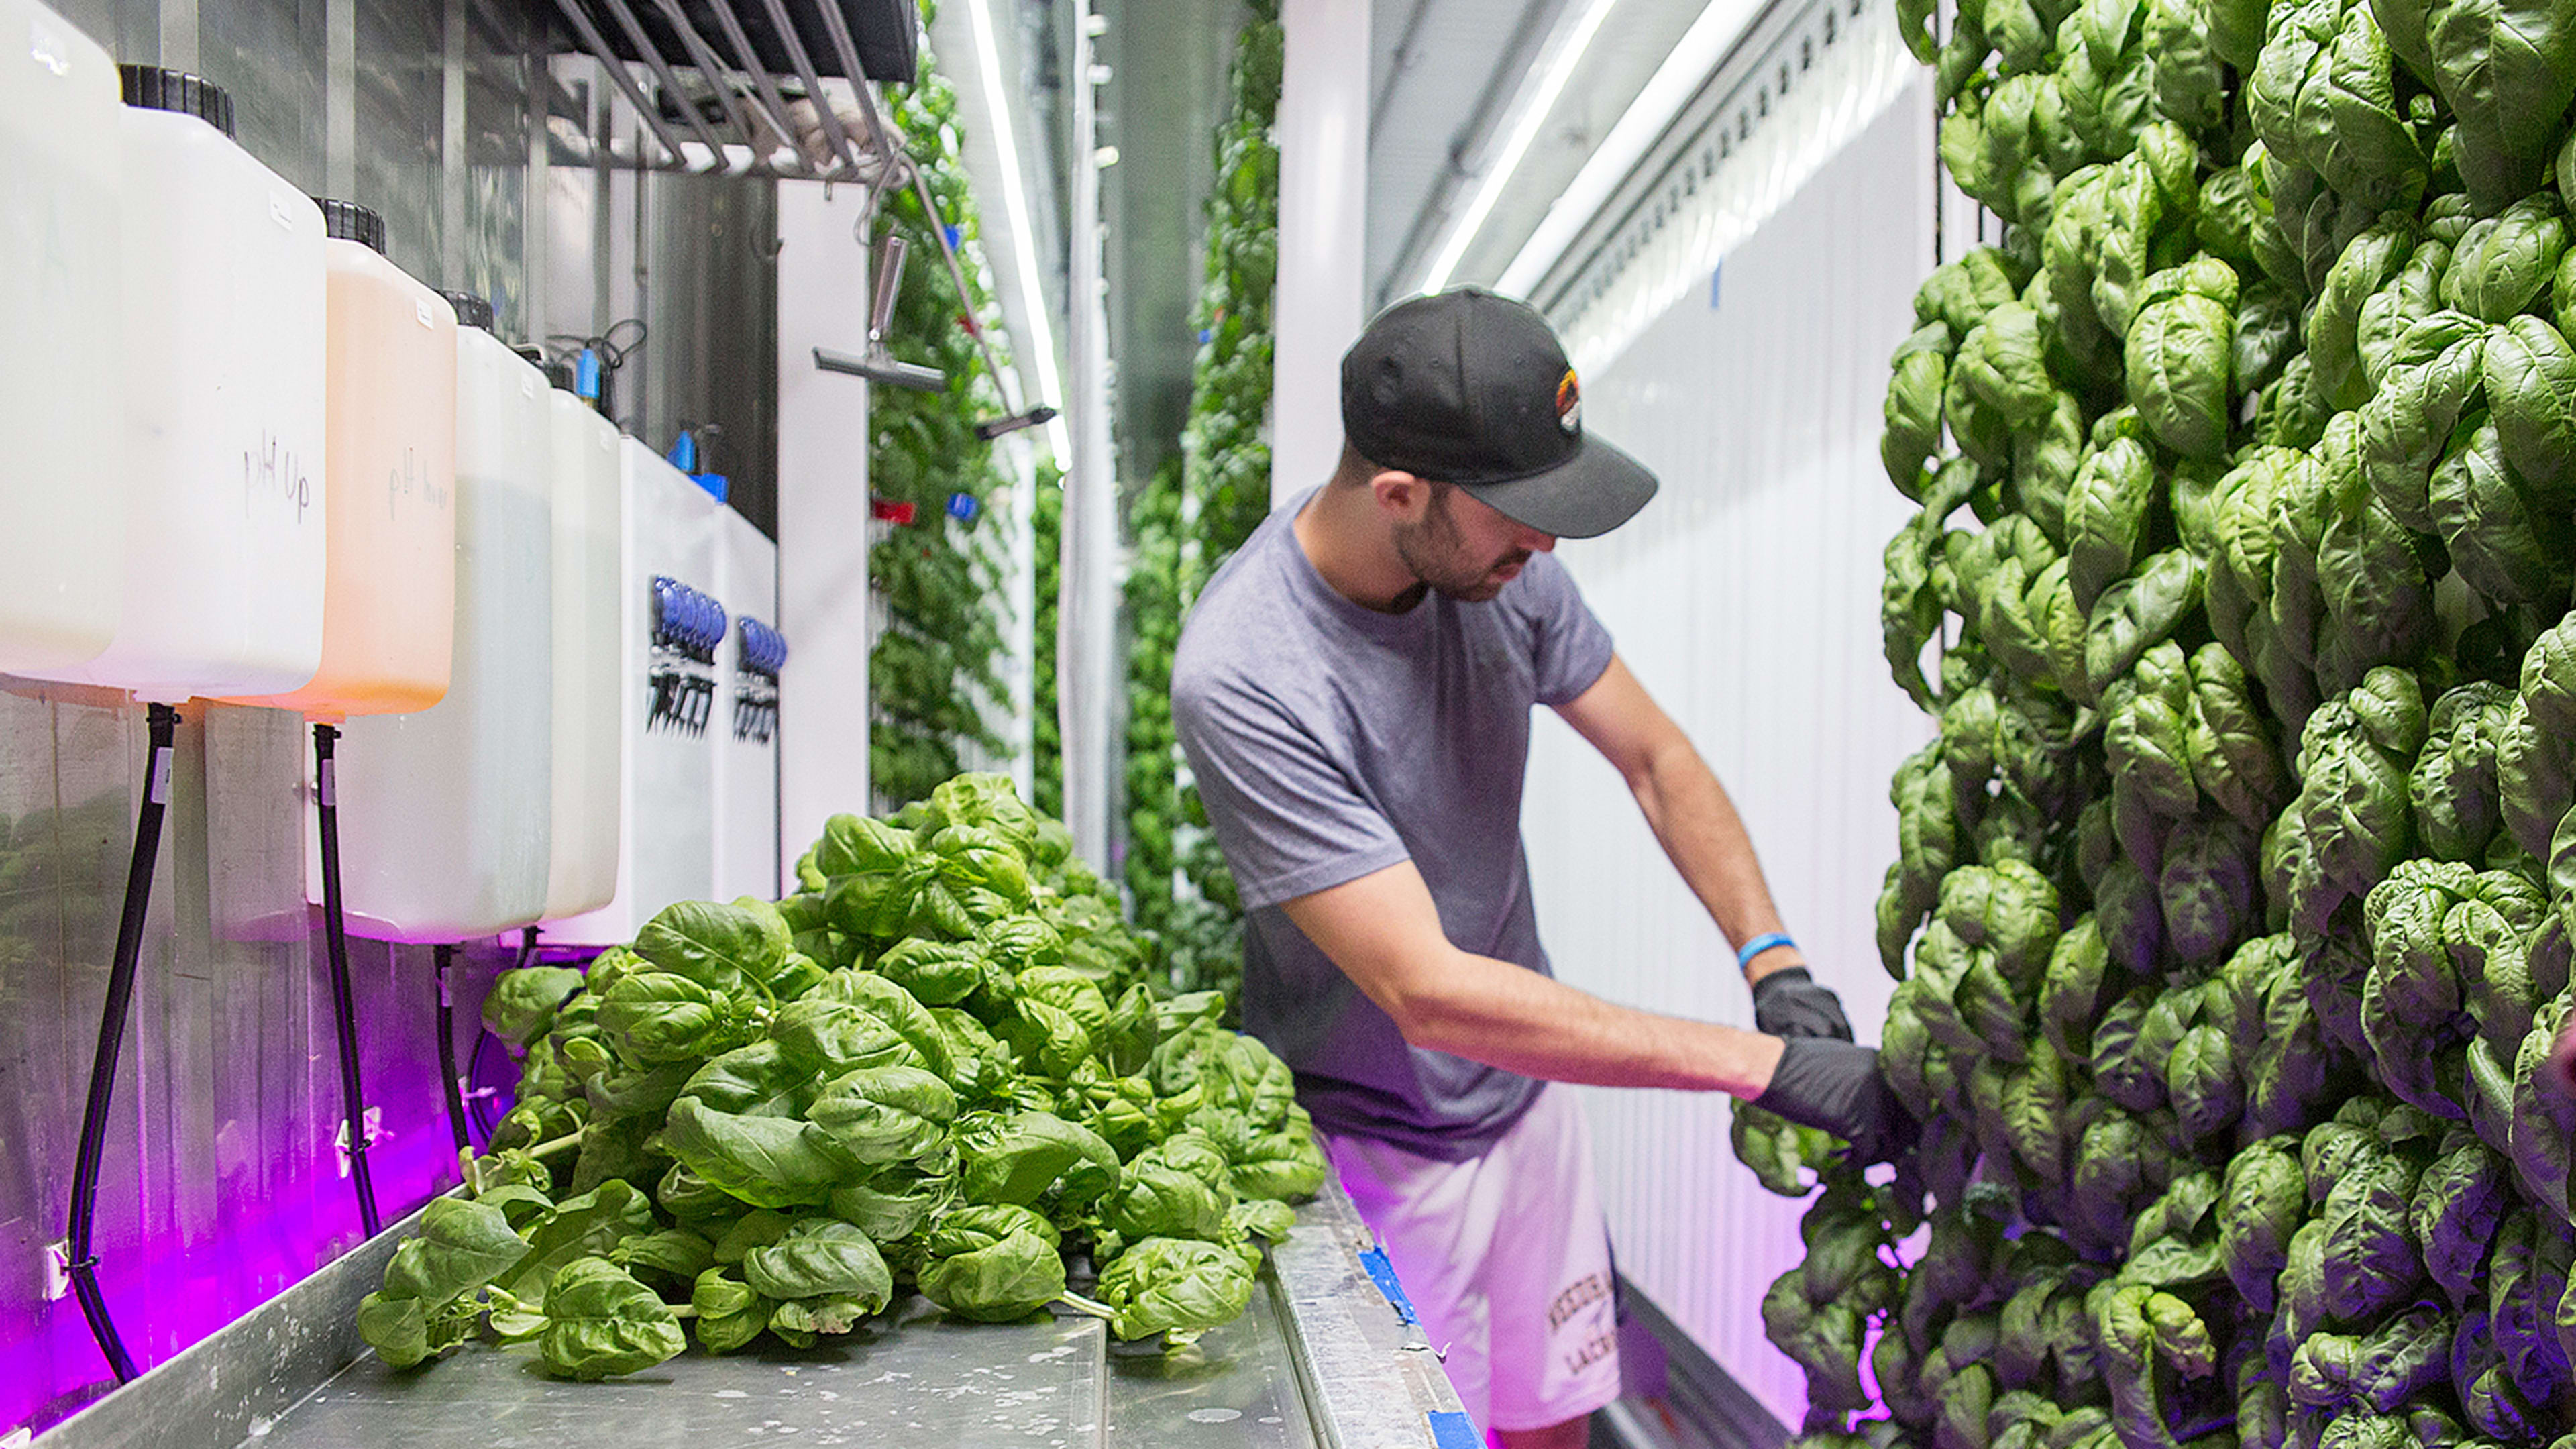 This Urban Farming Accelerator Wants To Let Thousands Of New Farms Bloom